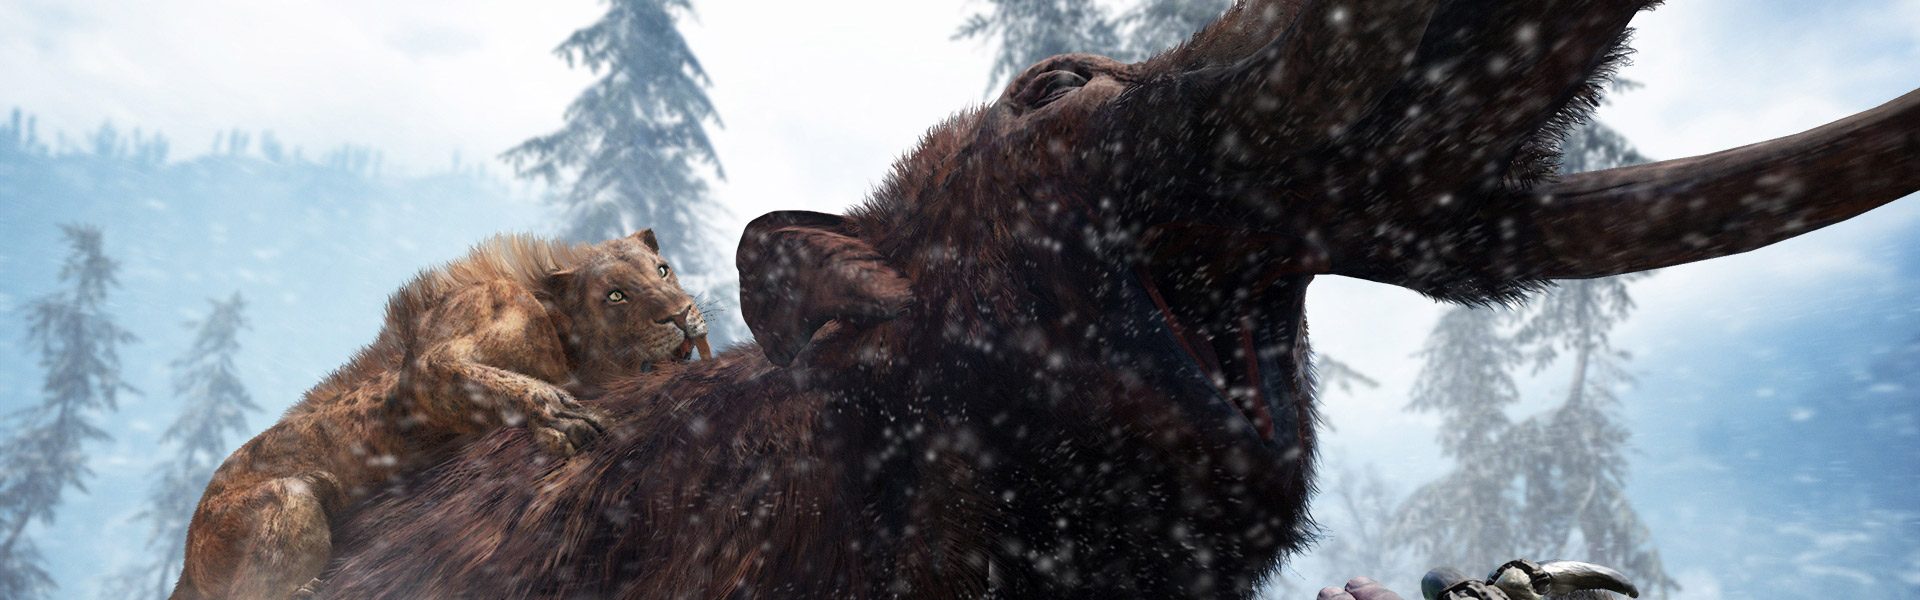 download far cry primal ull for free